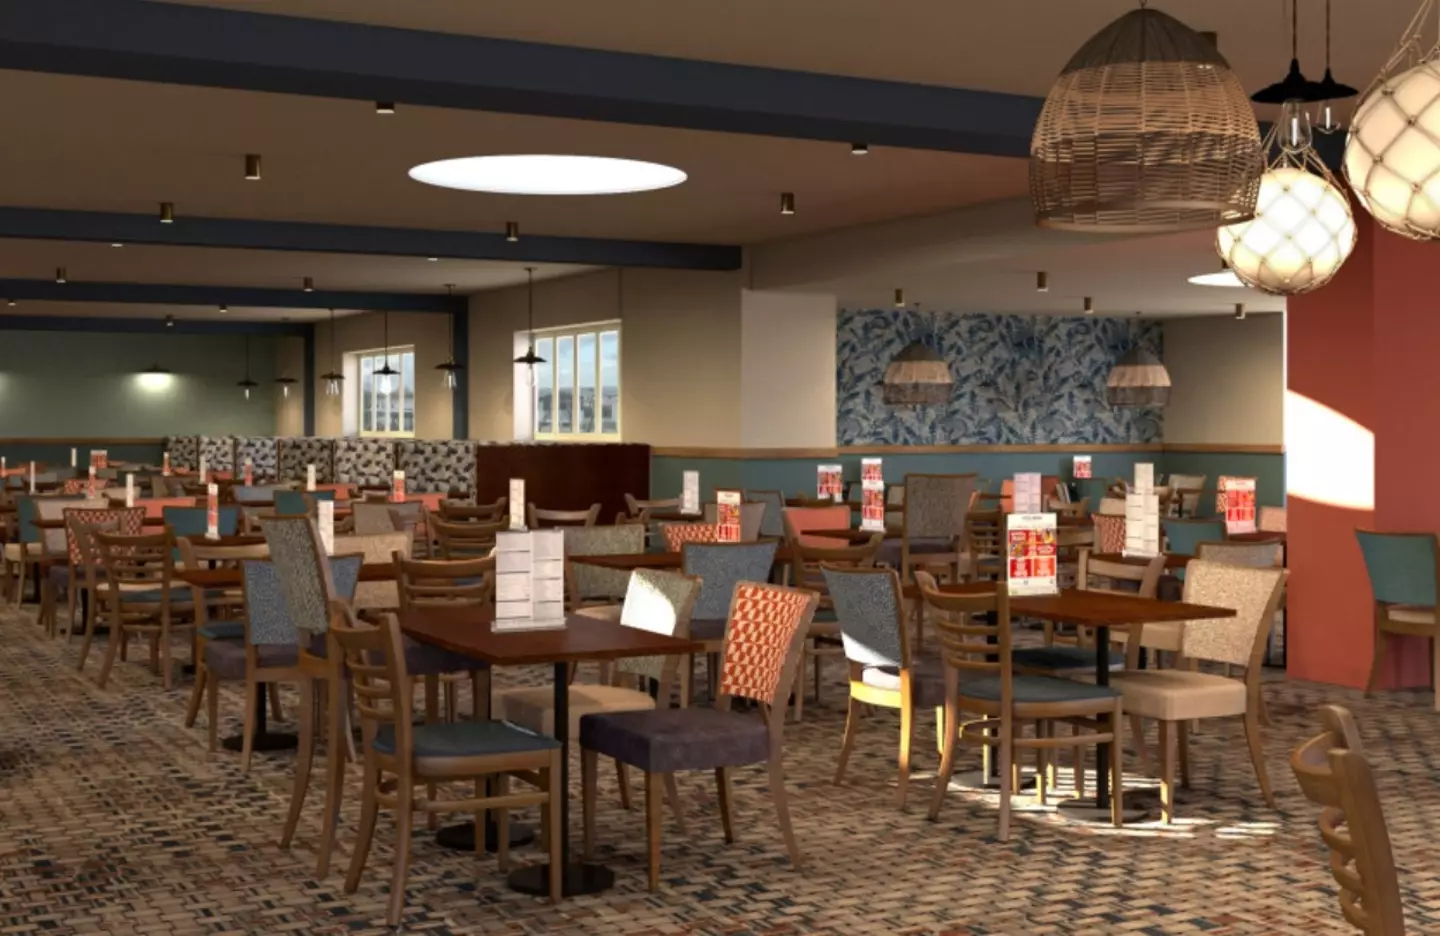 Another CGI mock-up of the pub, what do we think of the potential decor?